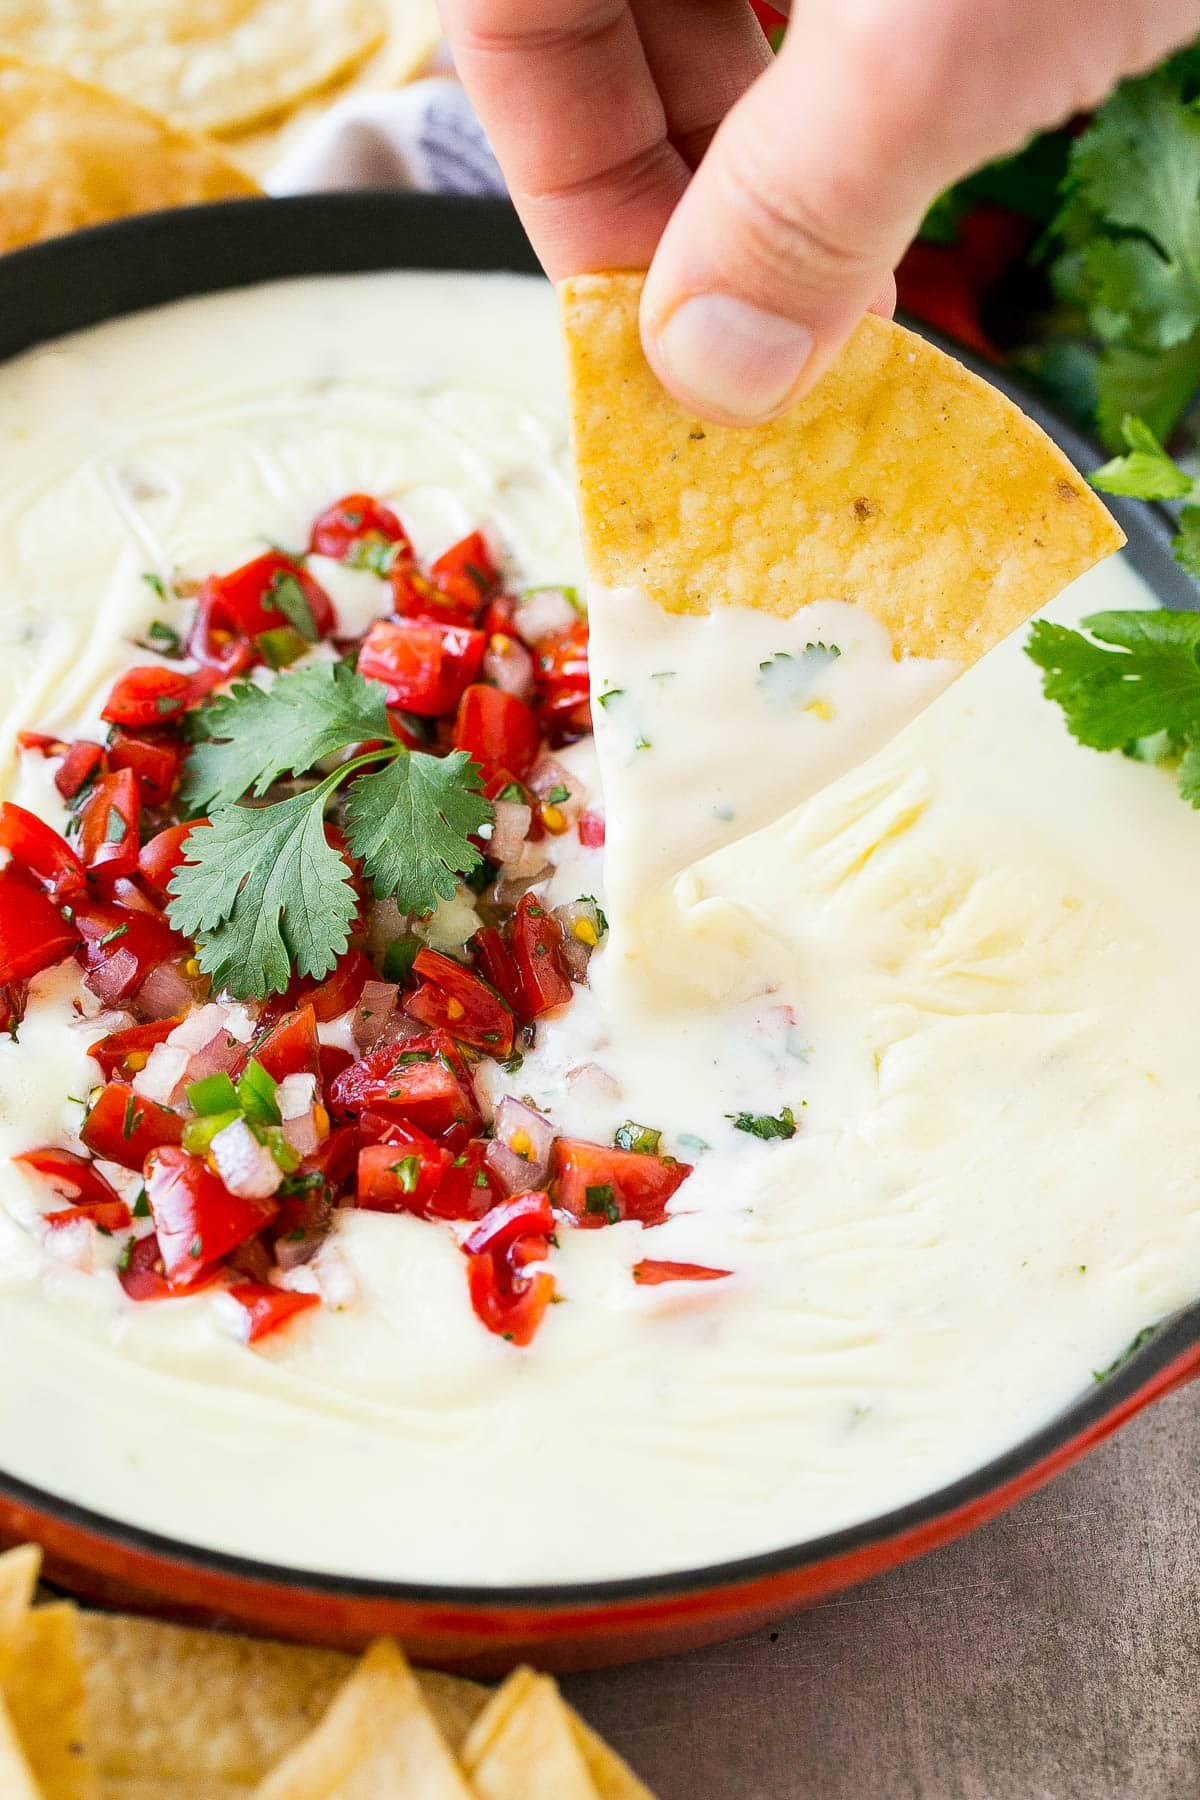 A hand with a chip scooping up a serving of white queso dip.